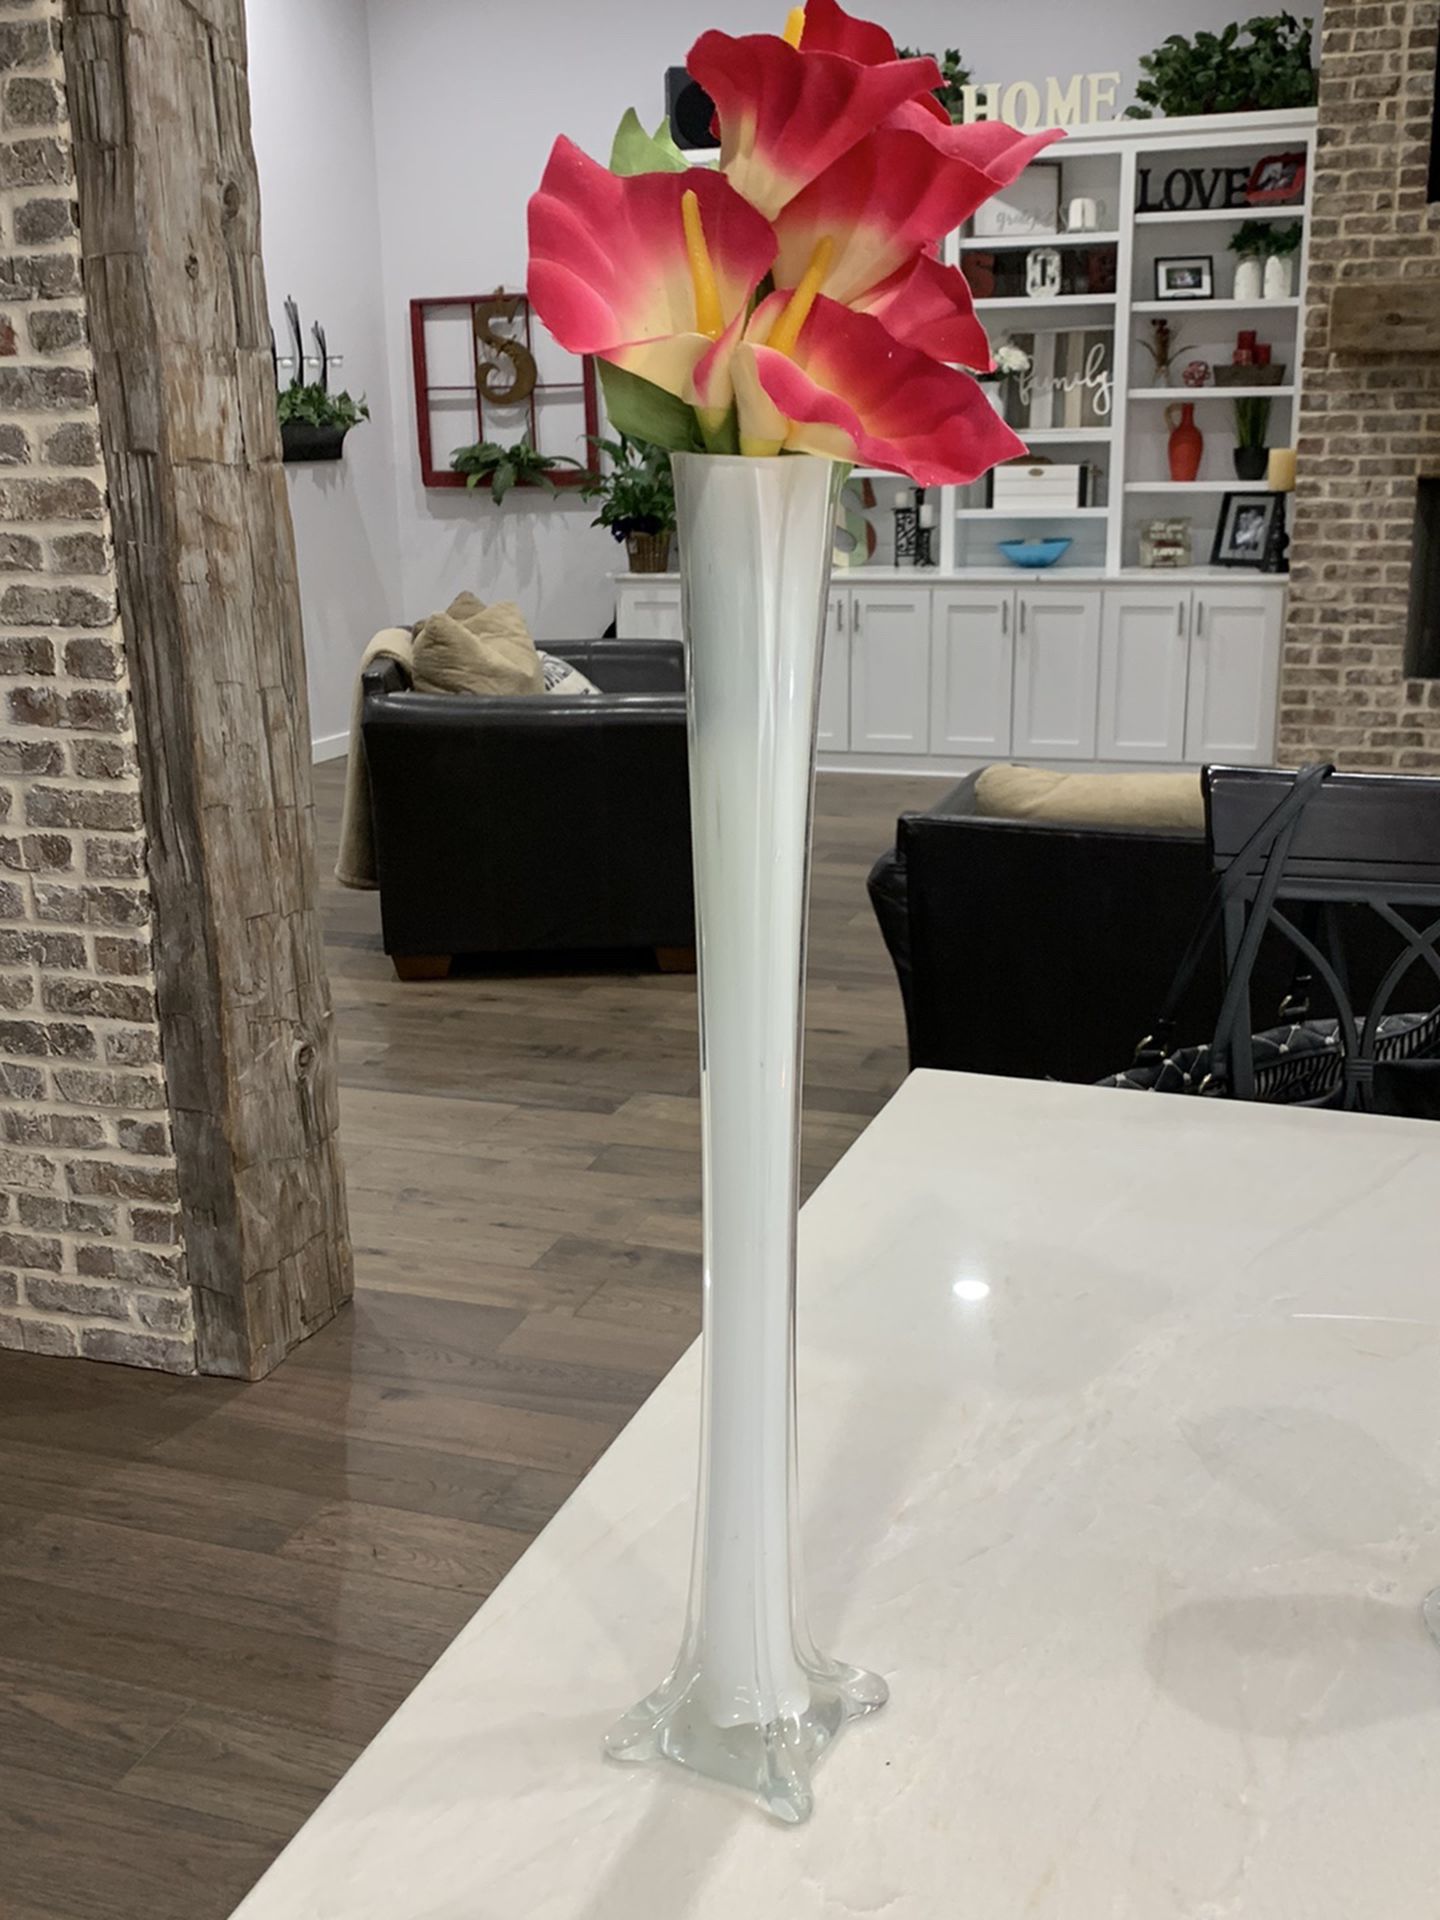 24” Tall Vase With Flowers